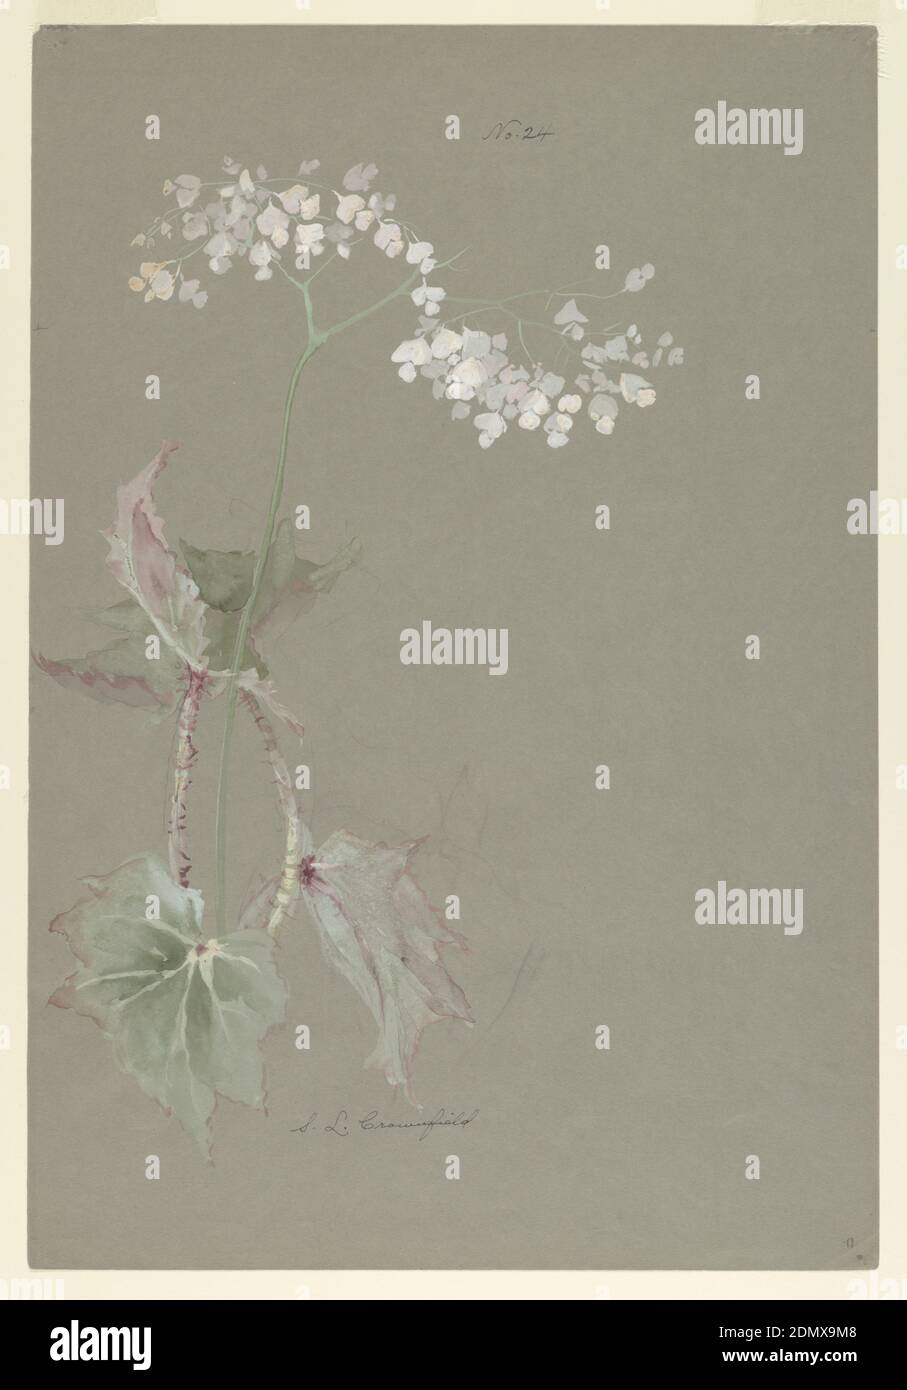 Study of Pink Begonia, Sophia L. Crownfield, (American, 1862–1929), Brush and watercolor, gouache on gray paper, Vertical sheet depicting a begonia plant with pale pink blossoms and green leaves with touches of red., USA, early 20th century, nature studies, Drawing Stock Photo